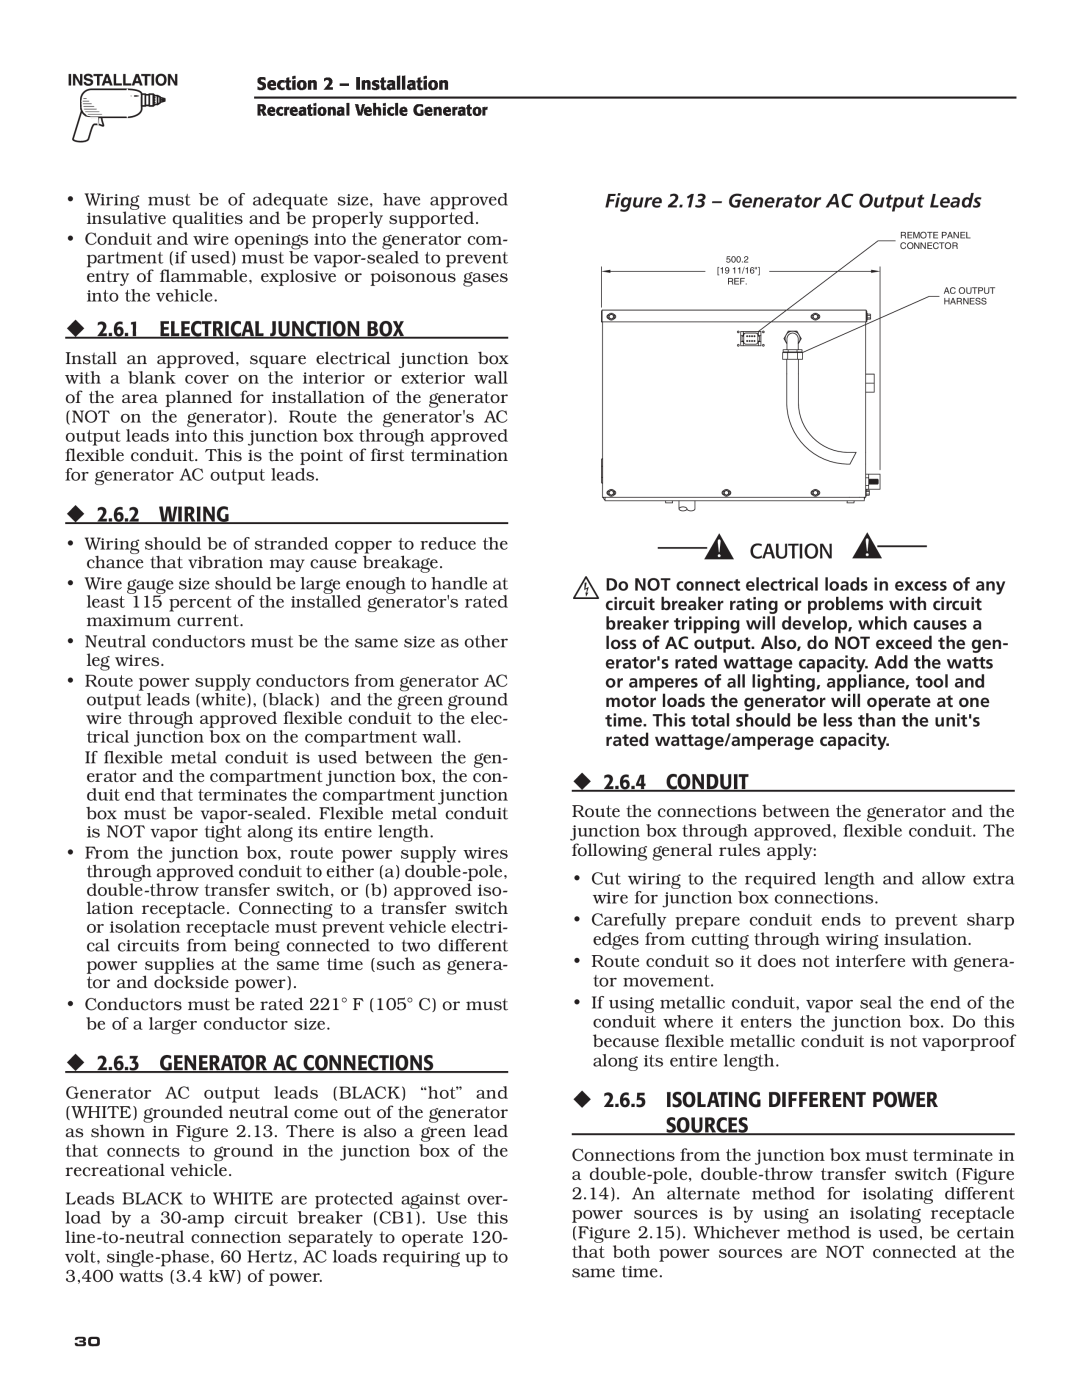 Generac Power Systems 004701-0 owner manual ‹2.6.1 ELECTRICAL JUNCTION BOX, ‹2.6.3 GENERATOR AC CONNECTIONS, ‹2.6.4 CONDUIT 